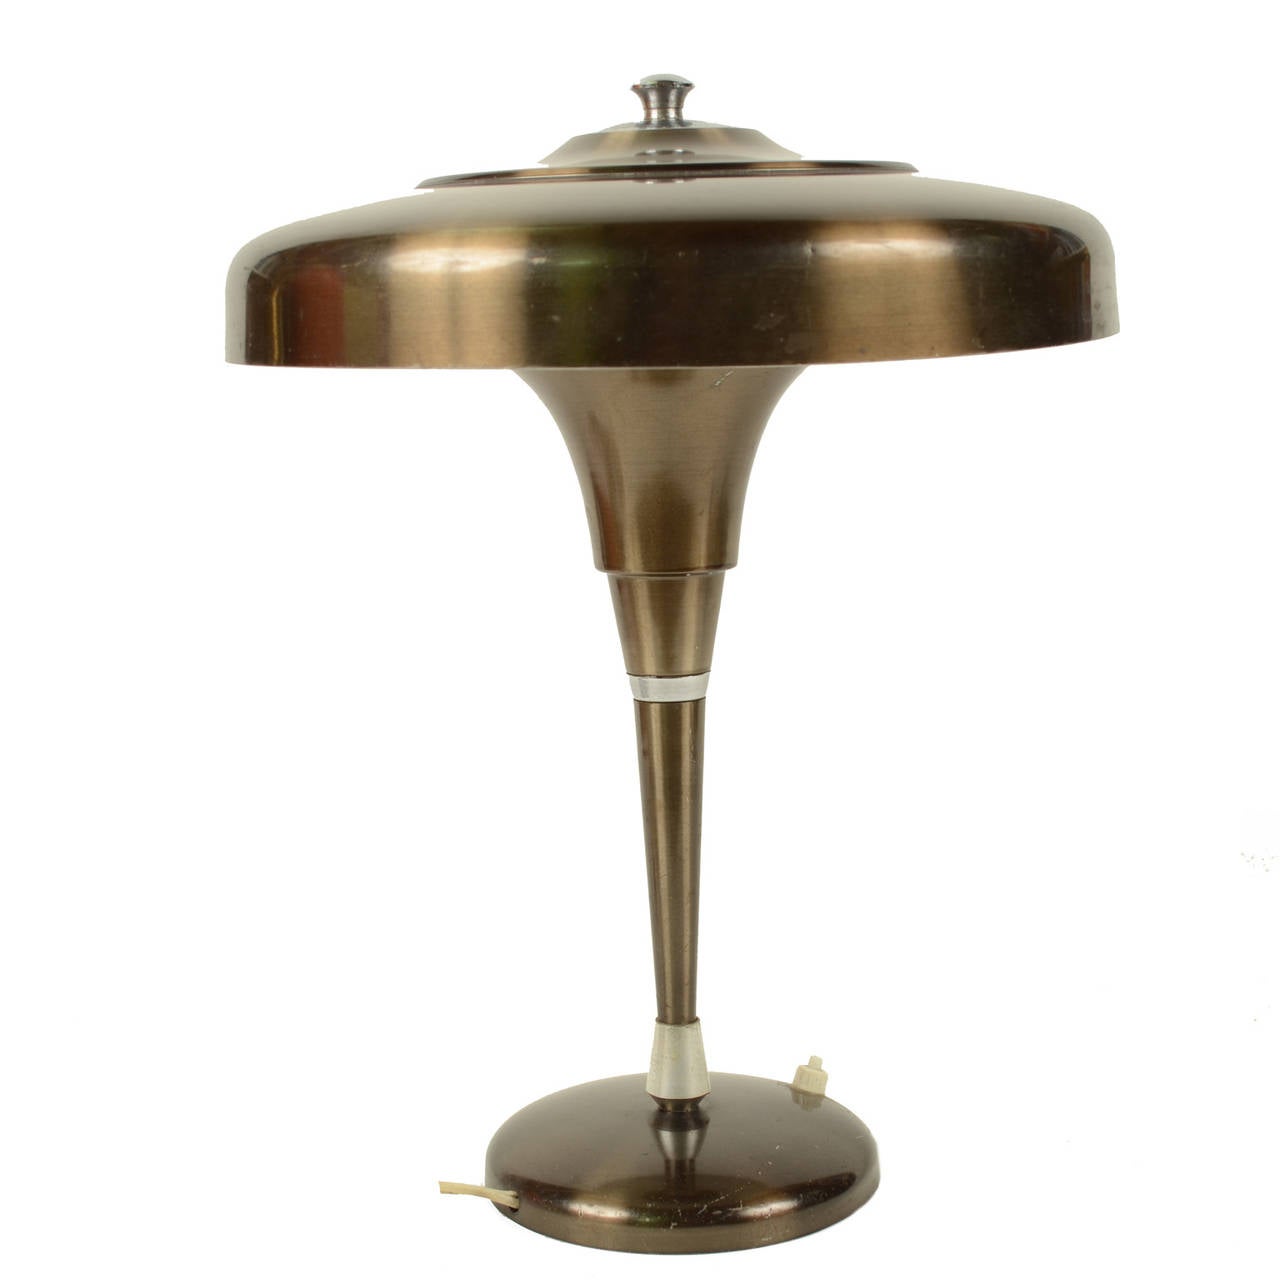 Table lamp mushroom shaped, art deco, anodized aluminum and chromed metal, Italian manufacture, 1930's. Good condition, the electrical part needs a restoration. Height 42 cm, width 32.